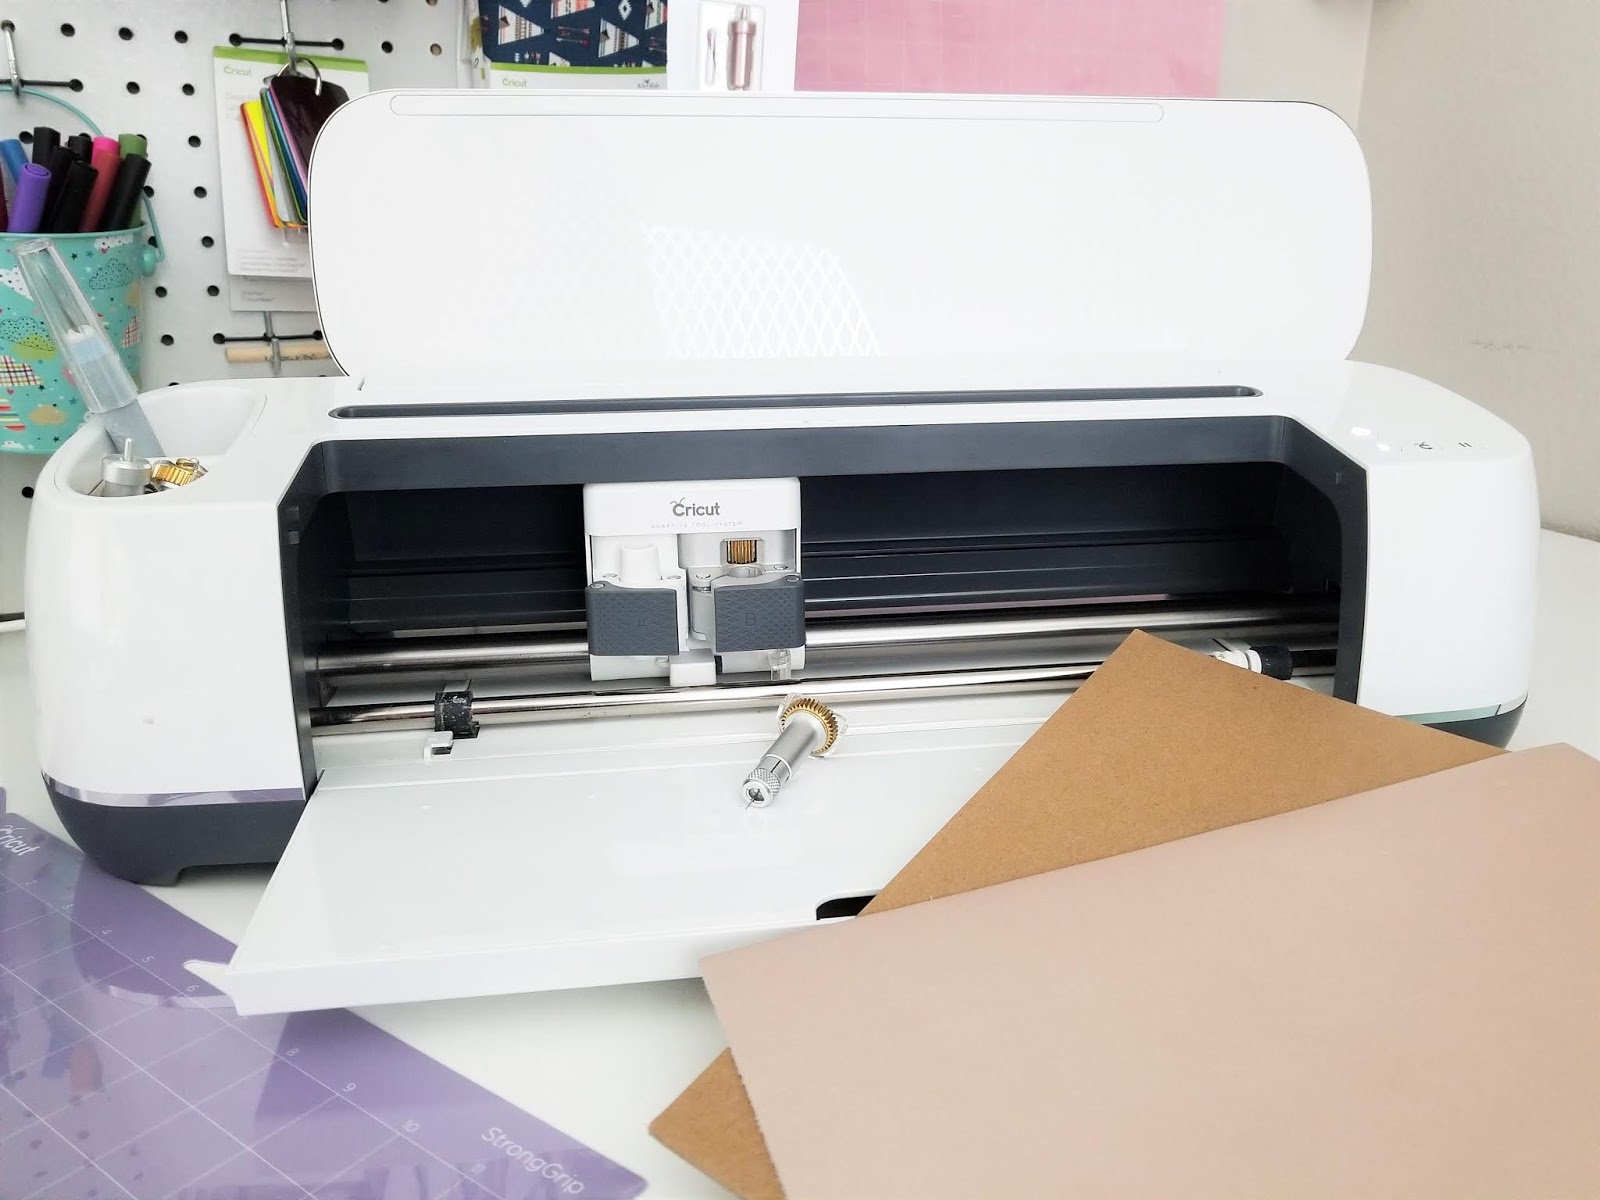 Is A Cricut Worth It for Sewing? - Melly Sews